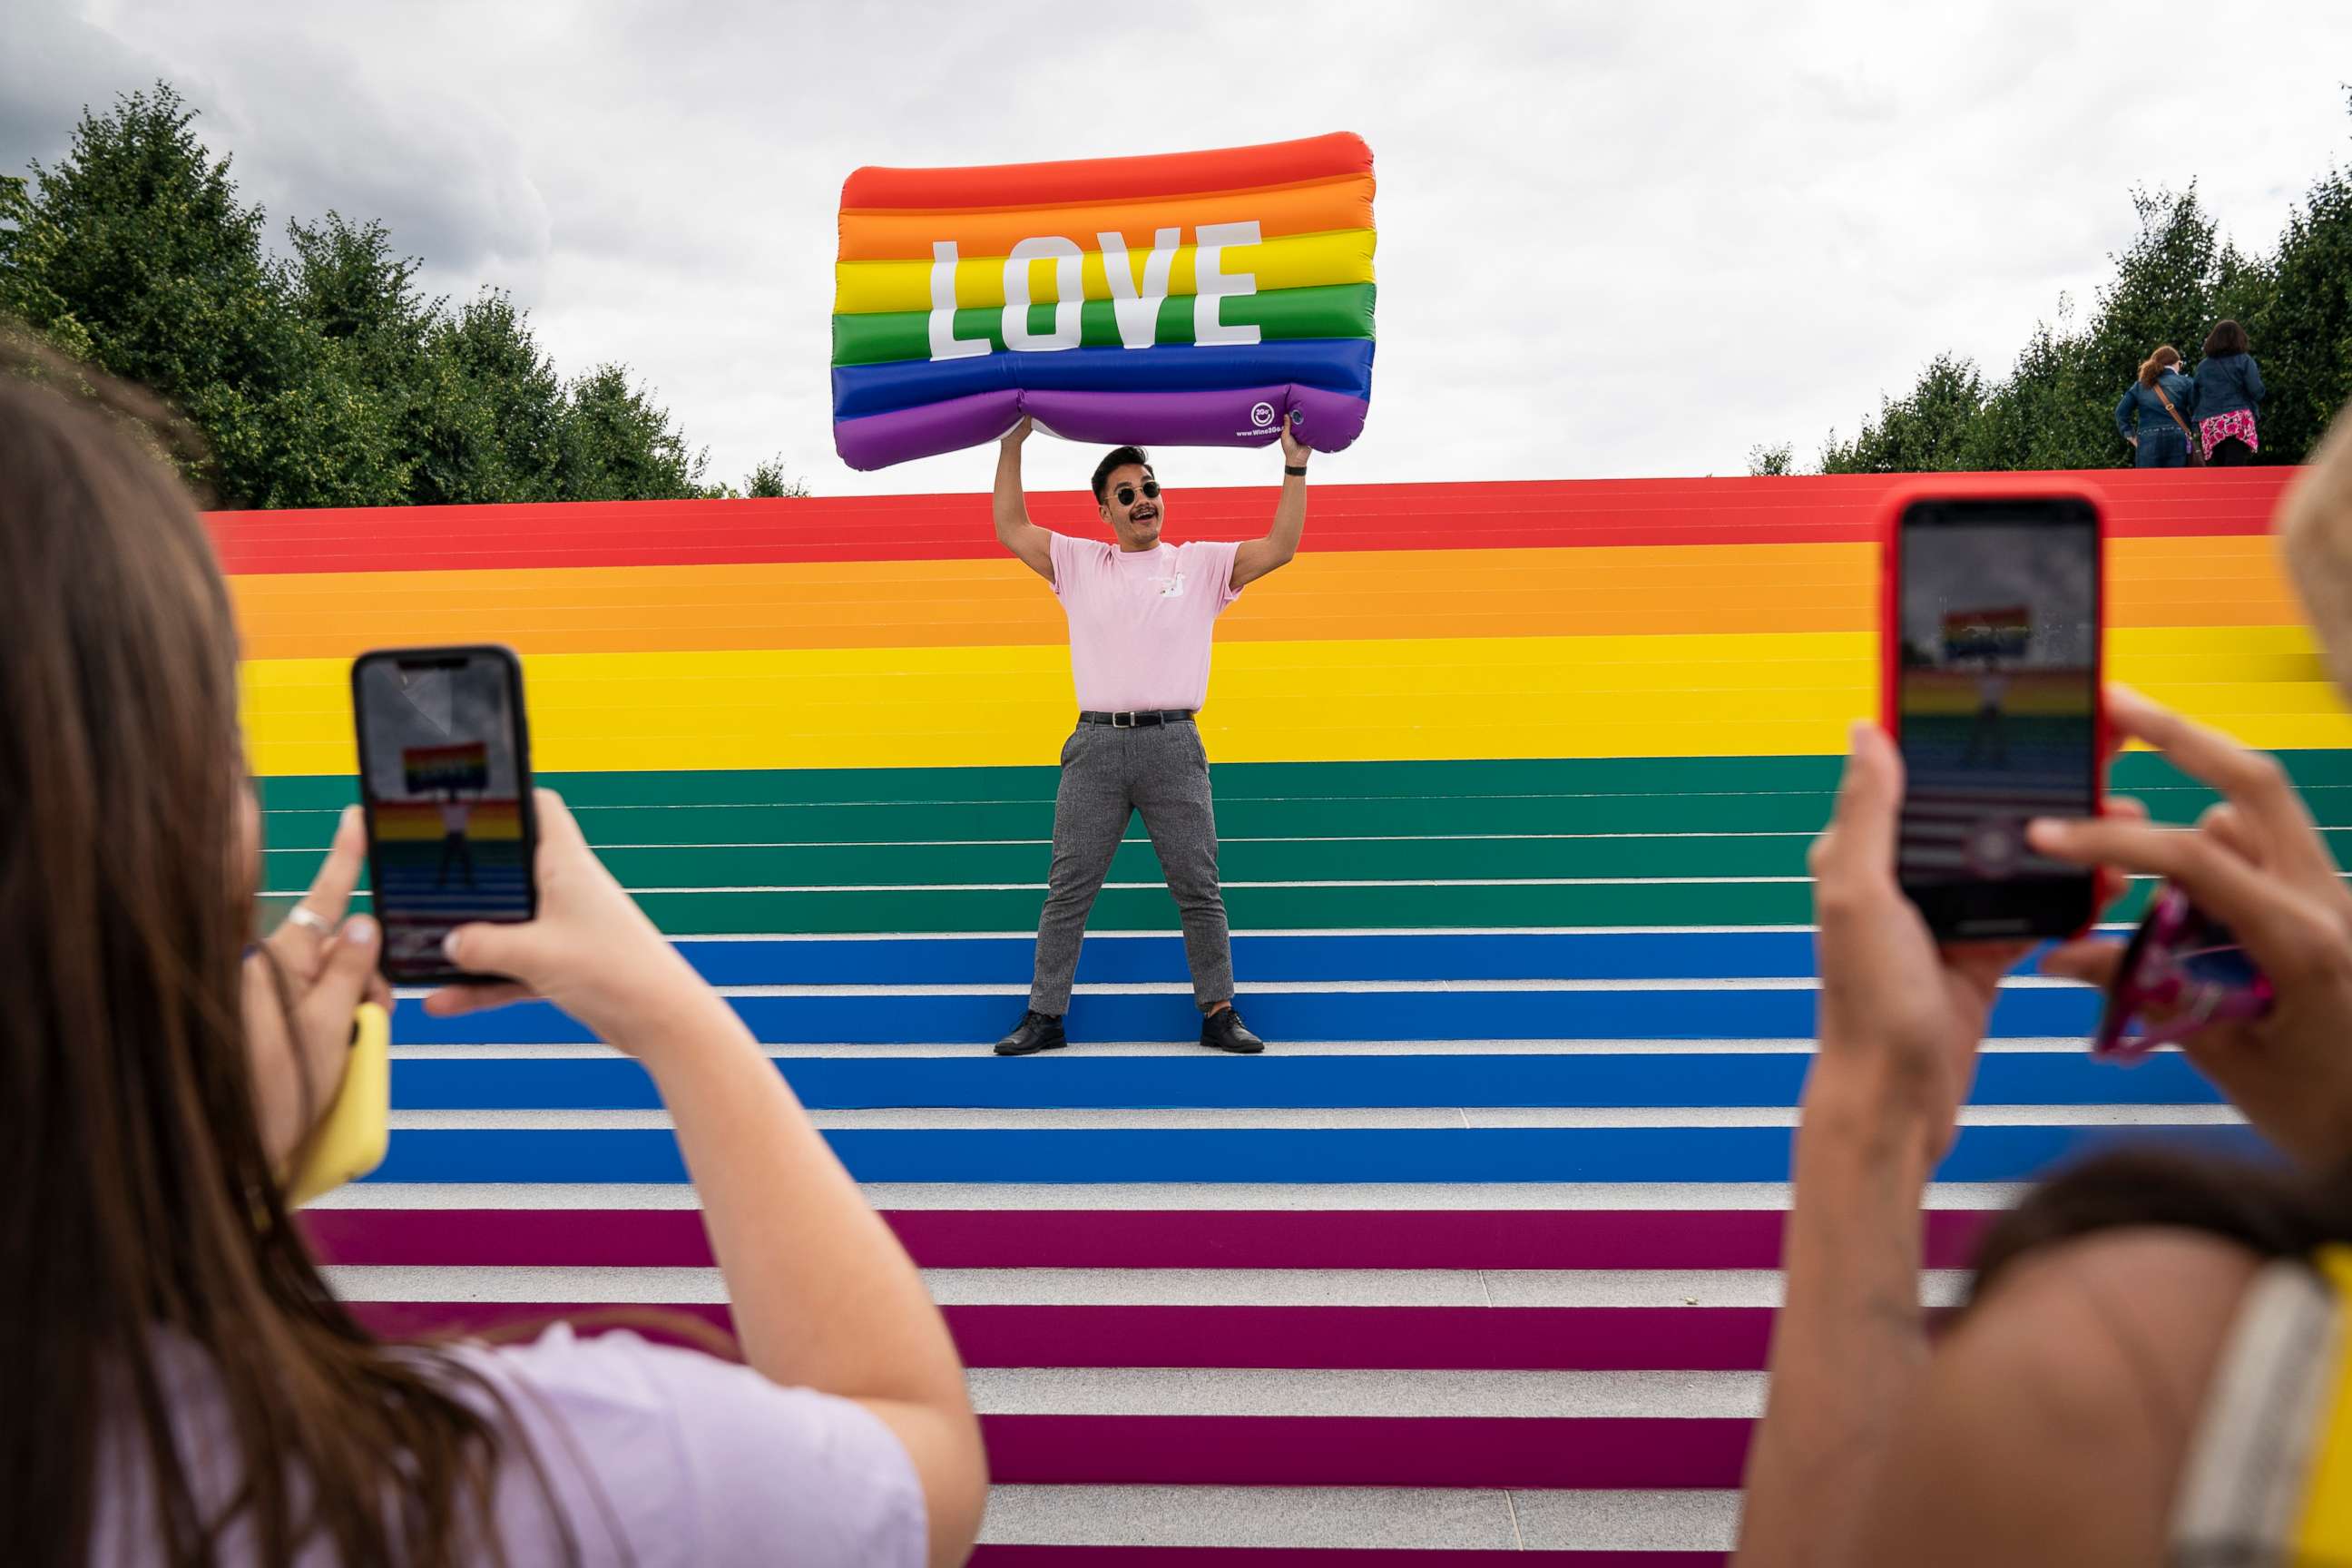 PHOTO: Lorenzo Soler poses for photos on the steps that are covered in rainbow colors for Pride Month at Franklin D. Roosevelt Four Freedoms Park, June 14, 2019 on Roosevelt Island in New York.